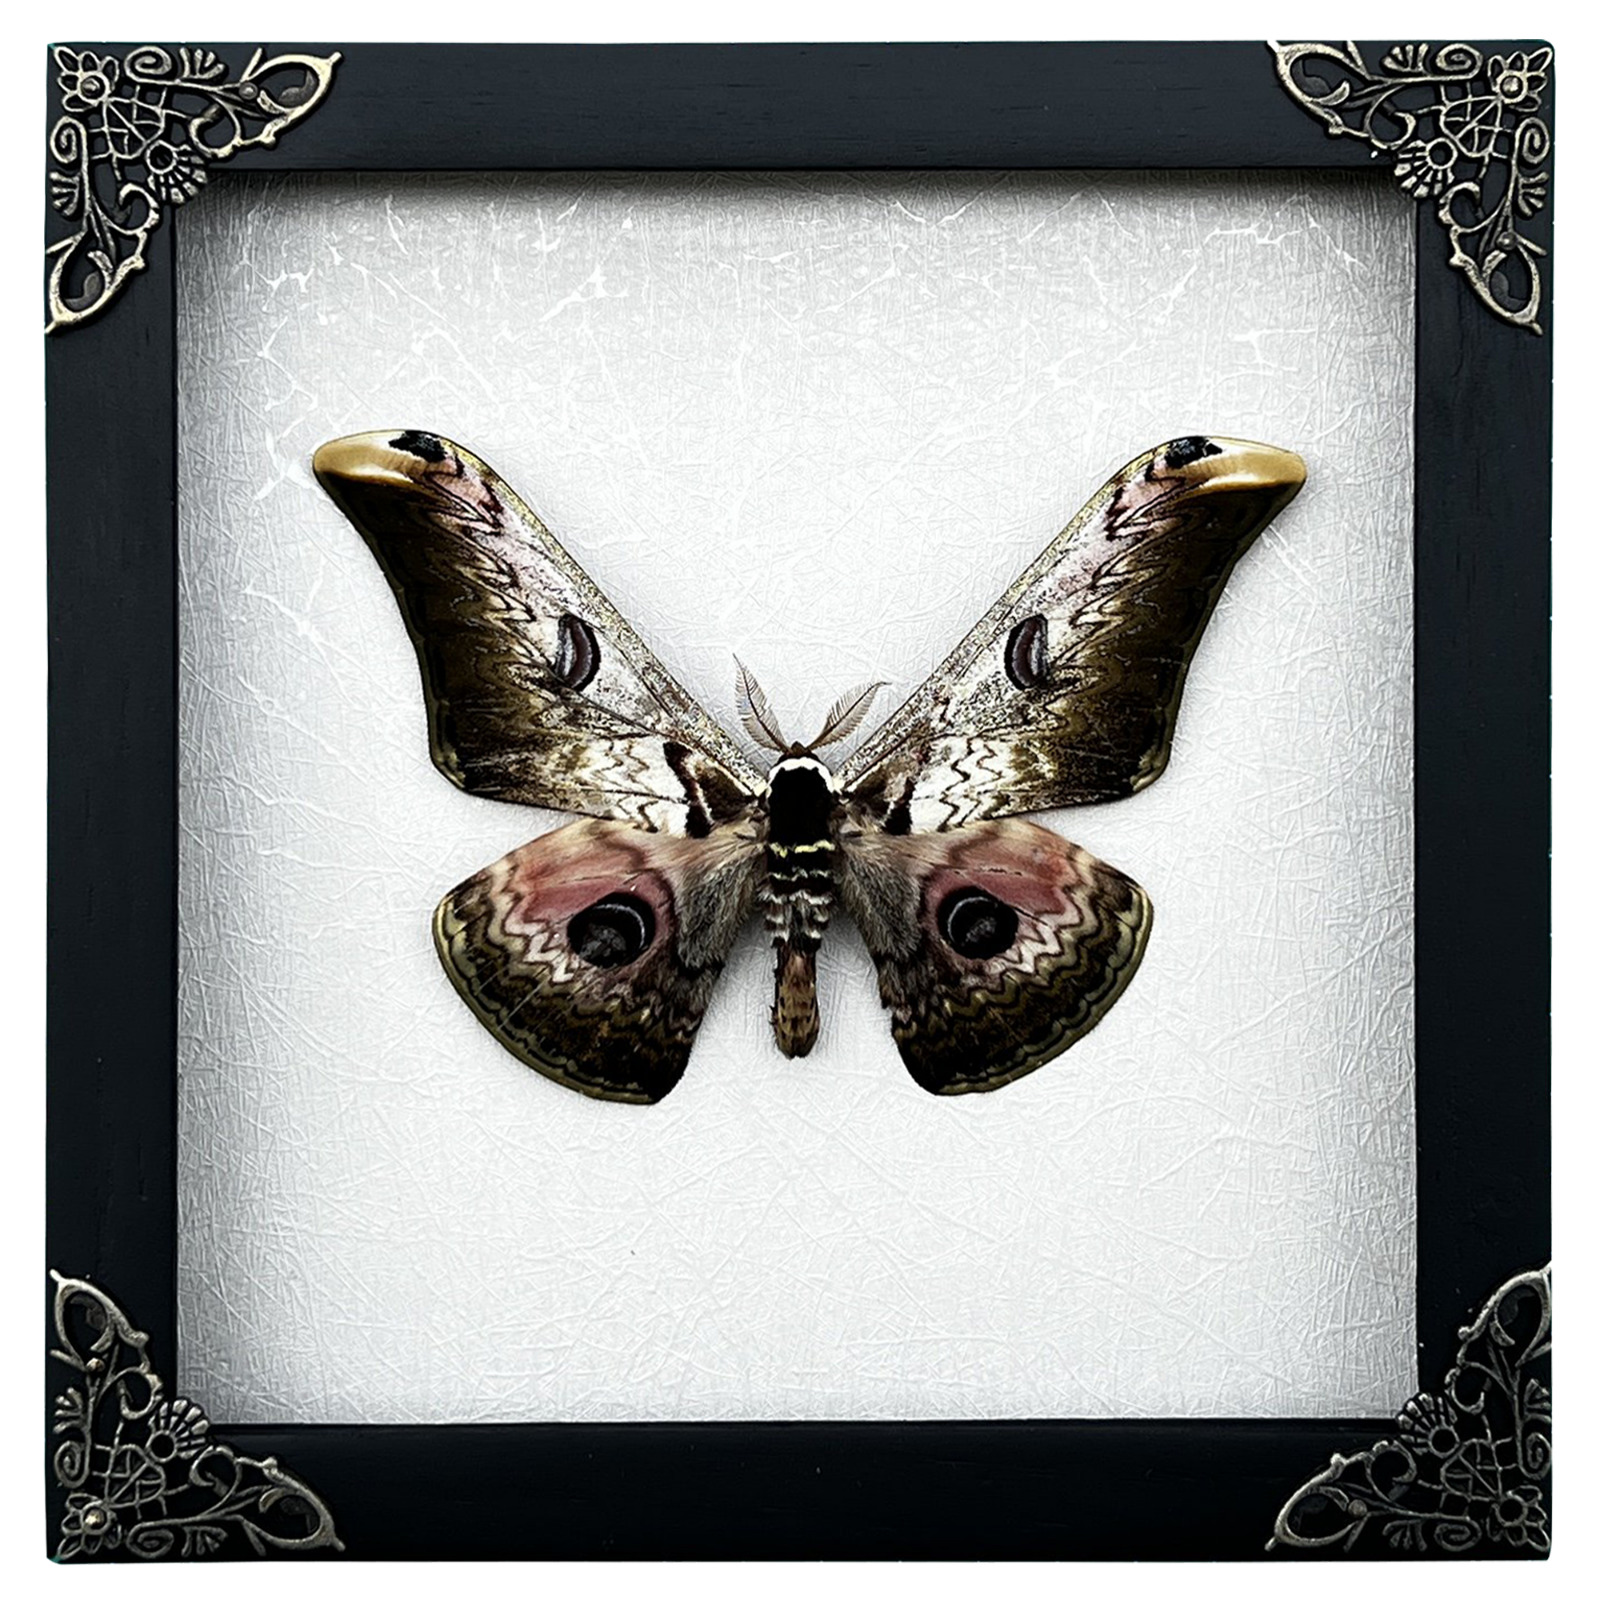 Moth Preserved Shadow Box Real Insect Taxidermy Oddities Decor Entomology Gift